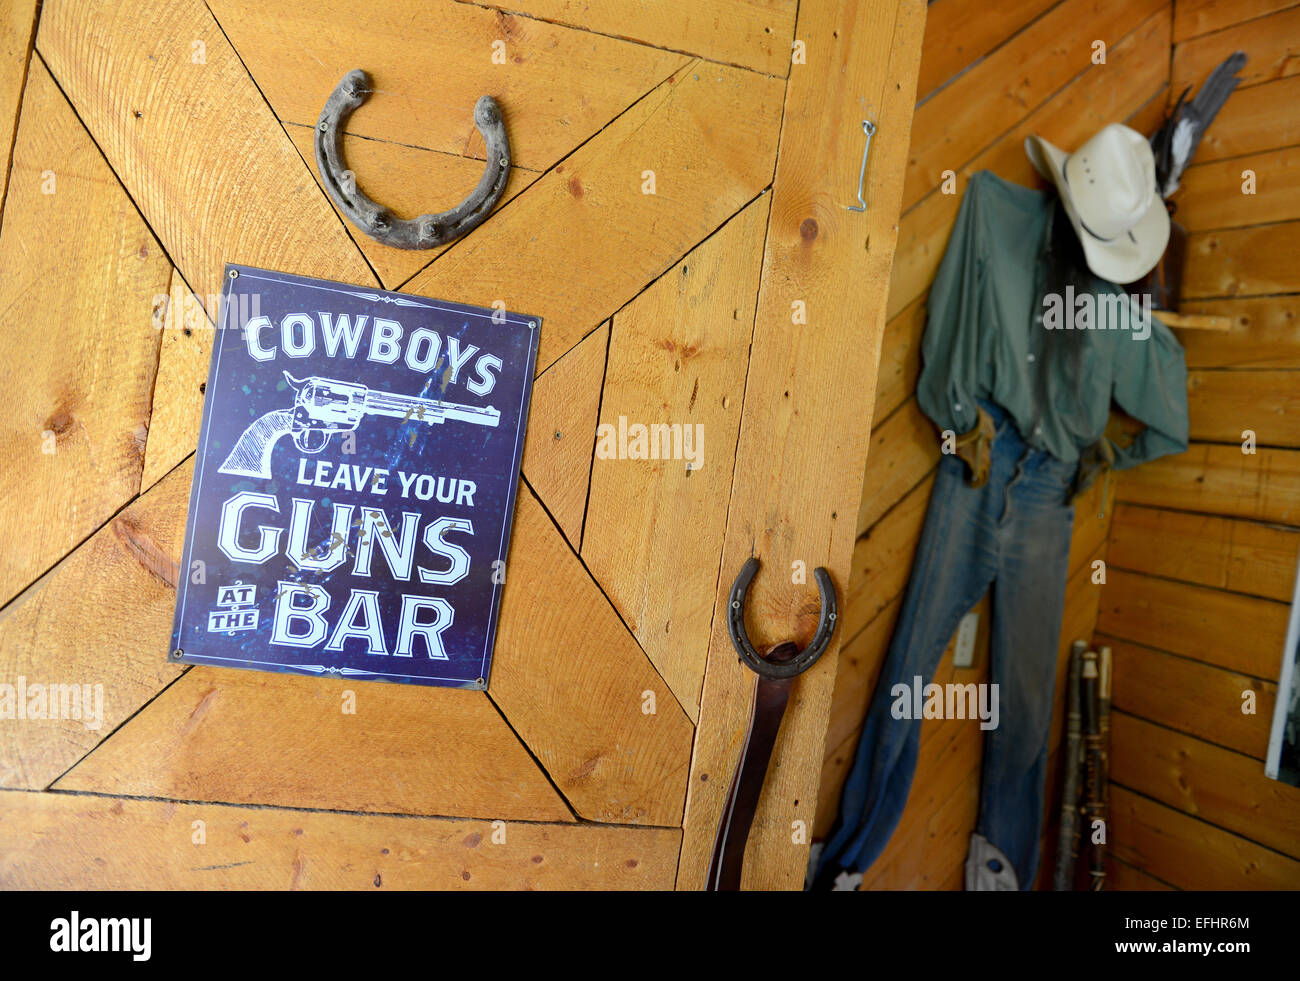 Cowboy sign, Leave your guns at the Bar, Wild West Stock Photo